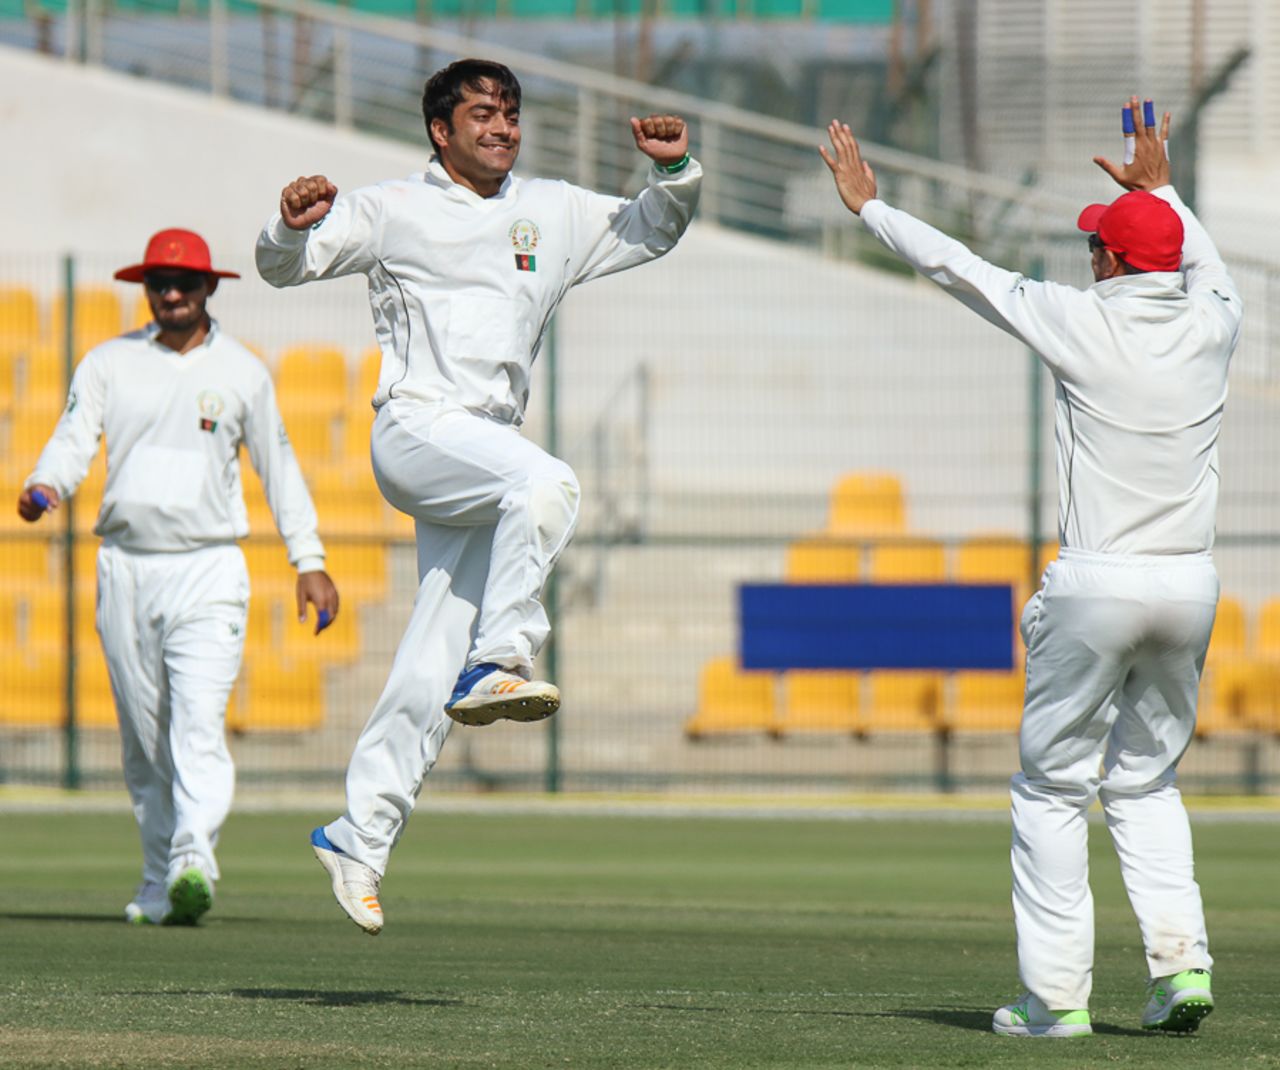 Rashid Khan leaps in the air to celebrate a five-wicket haul, UAE v Afghanistan, 2015-17 Intercontinental Cup, 4th day, Abu Dhabi, December 2, 2017